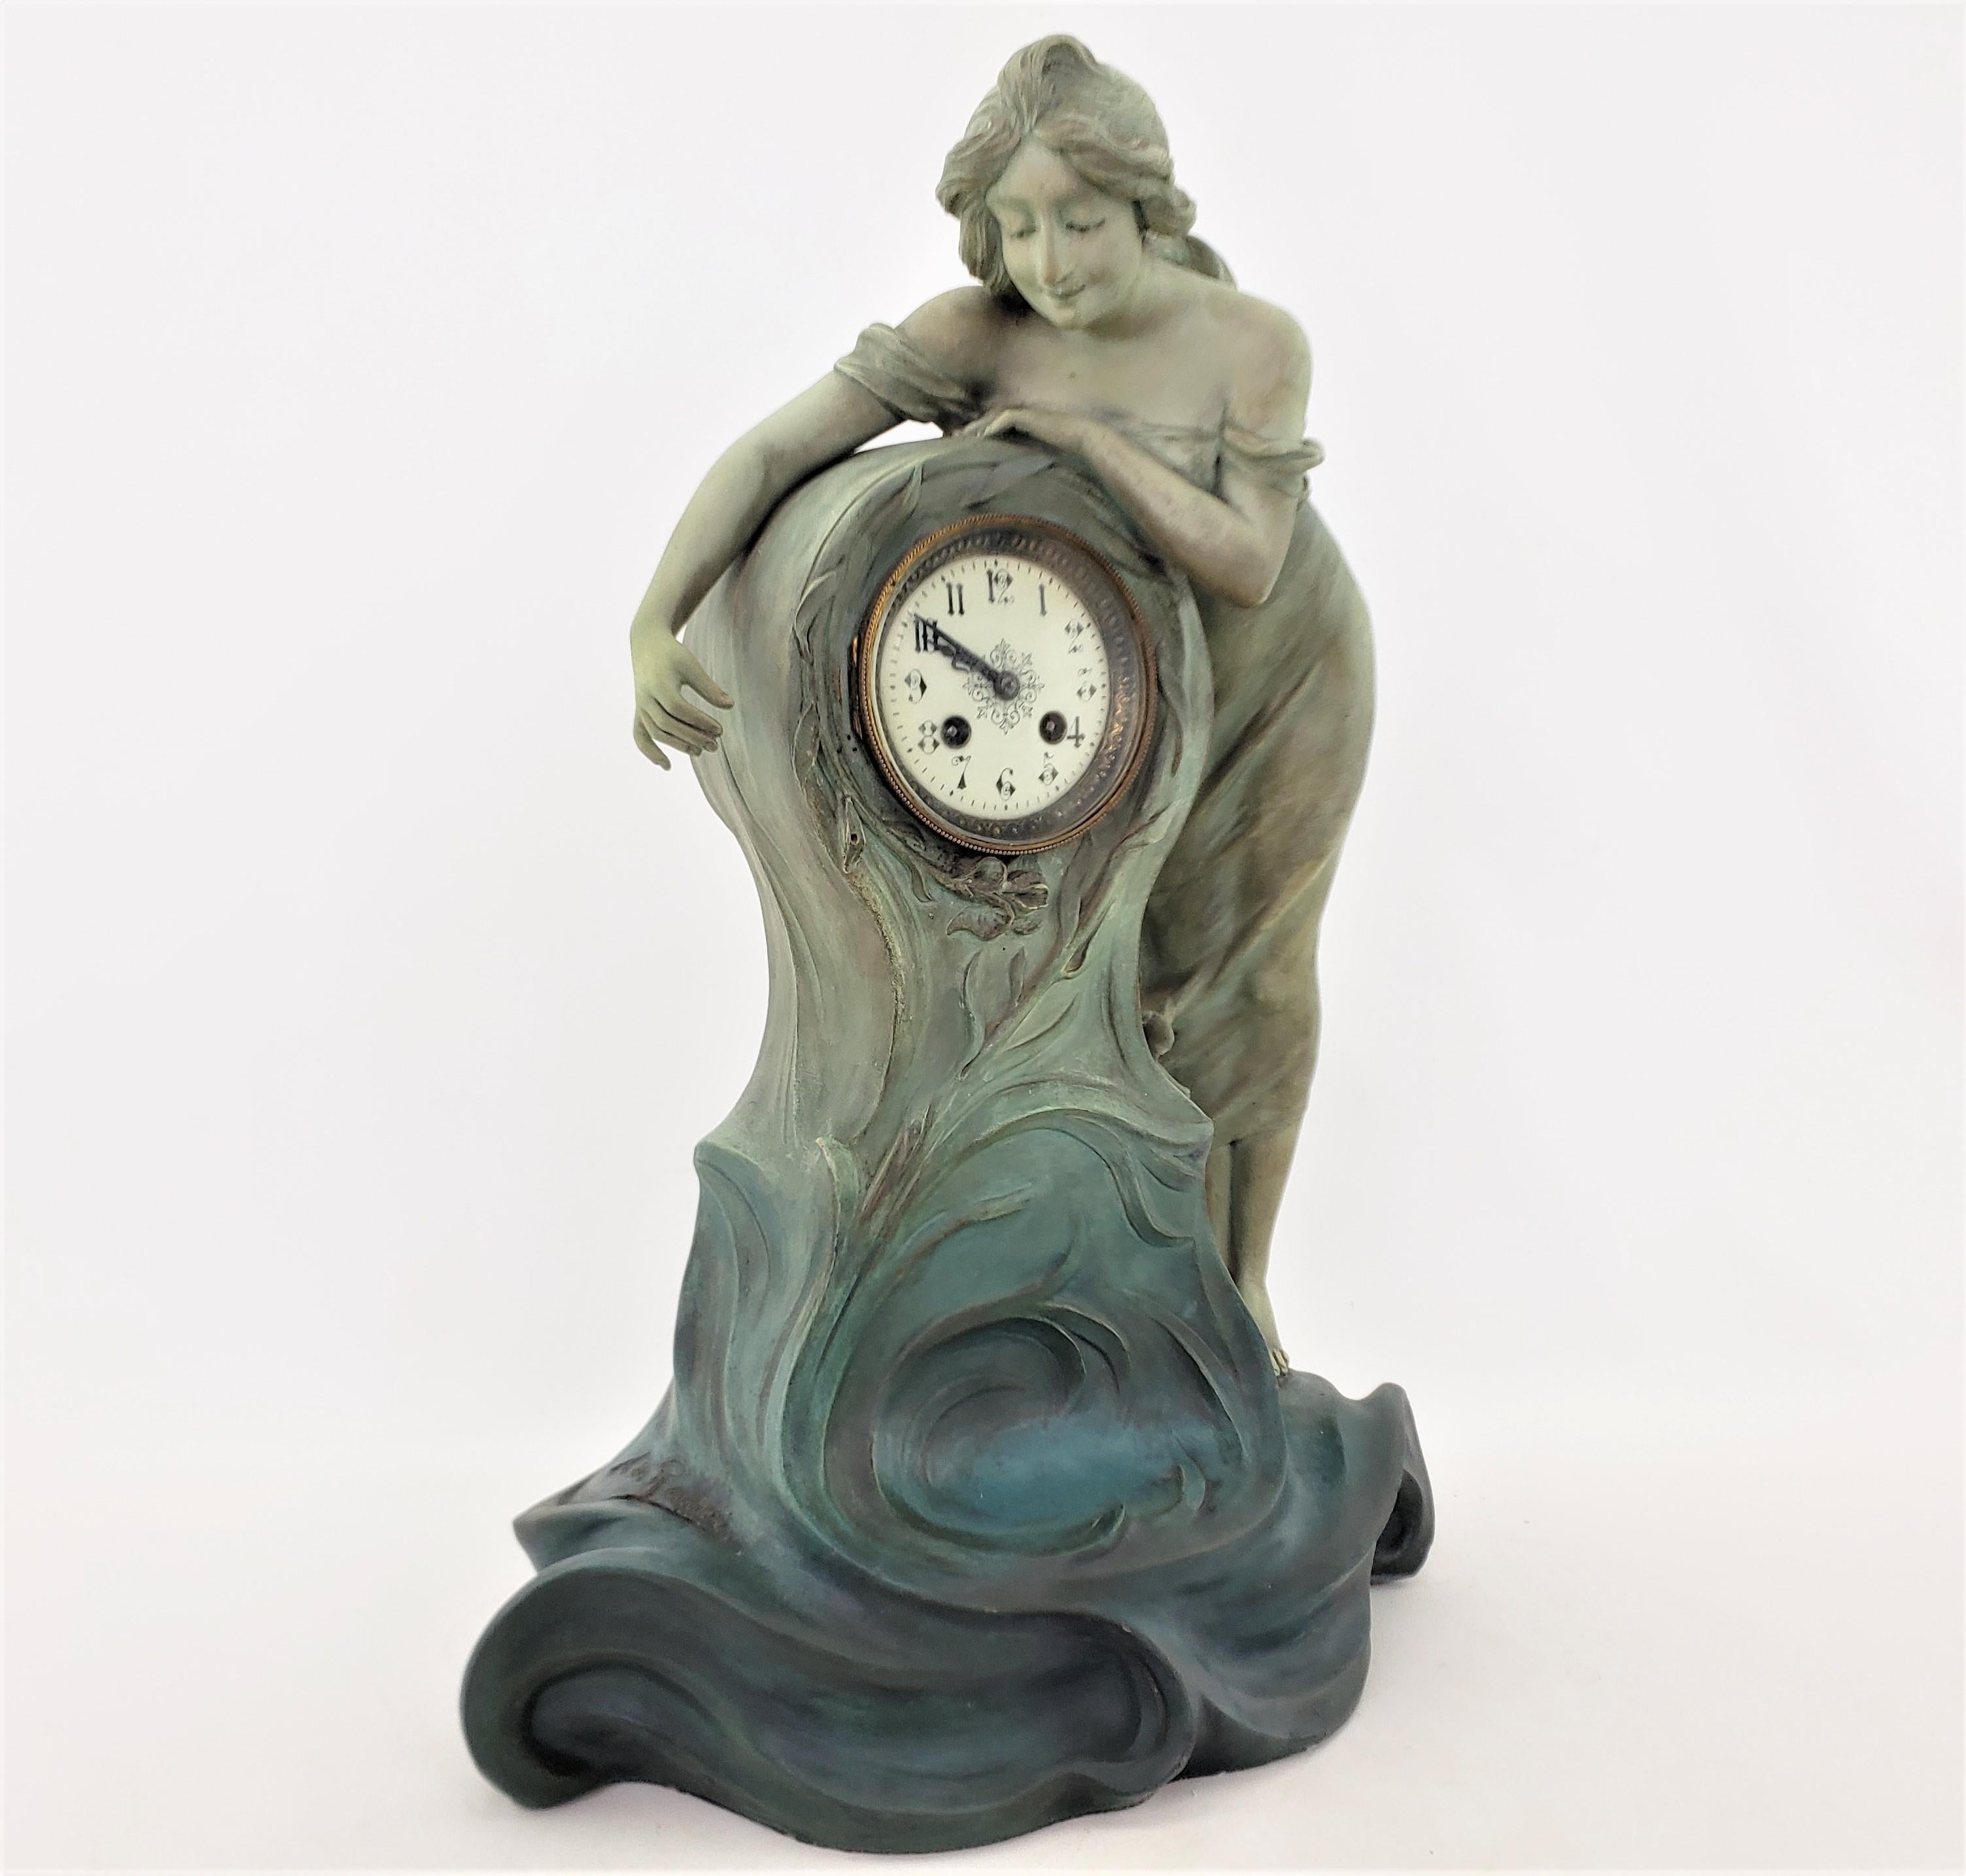 Thia antique mantel or table clock was made by the well known Italian born sculptor Archimede de Ranieri, who did much of his work in France and made this in approximately 1900 in the period Art Nouveau style. The sculptural clock case is composed